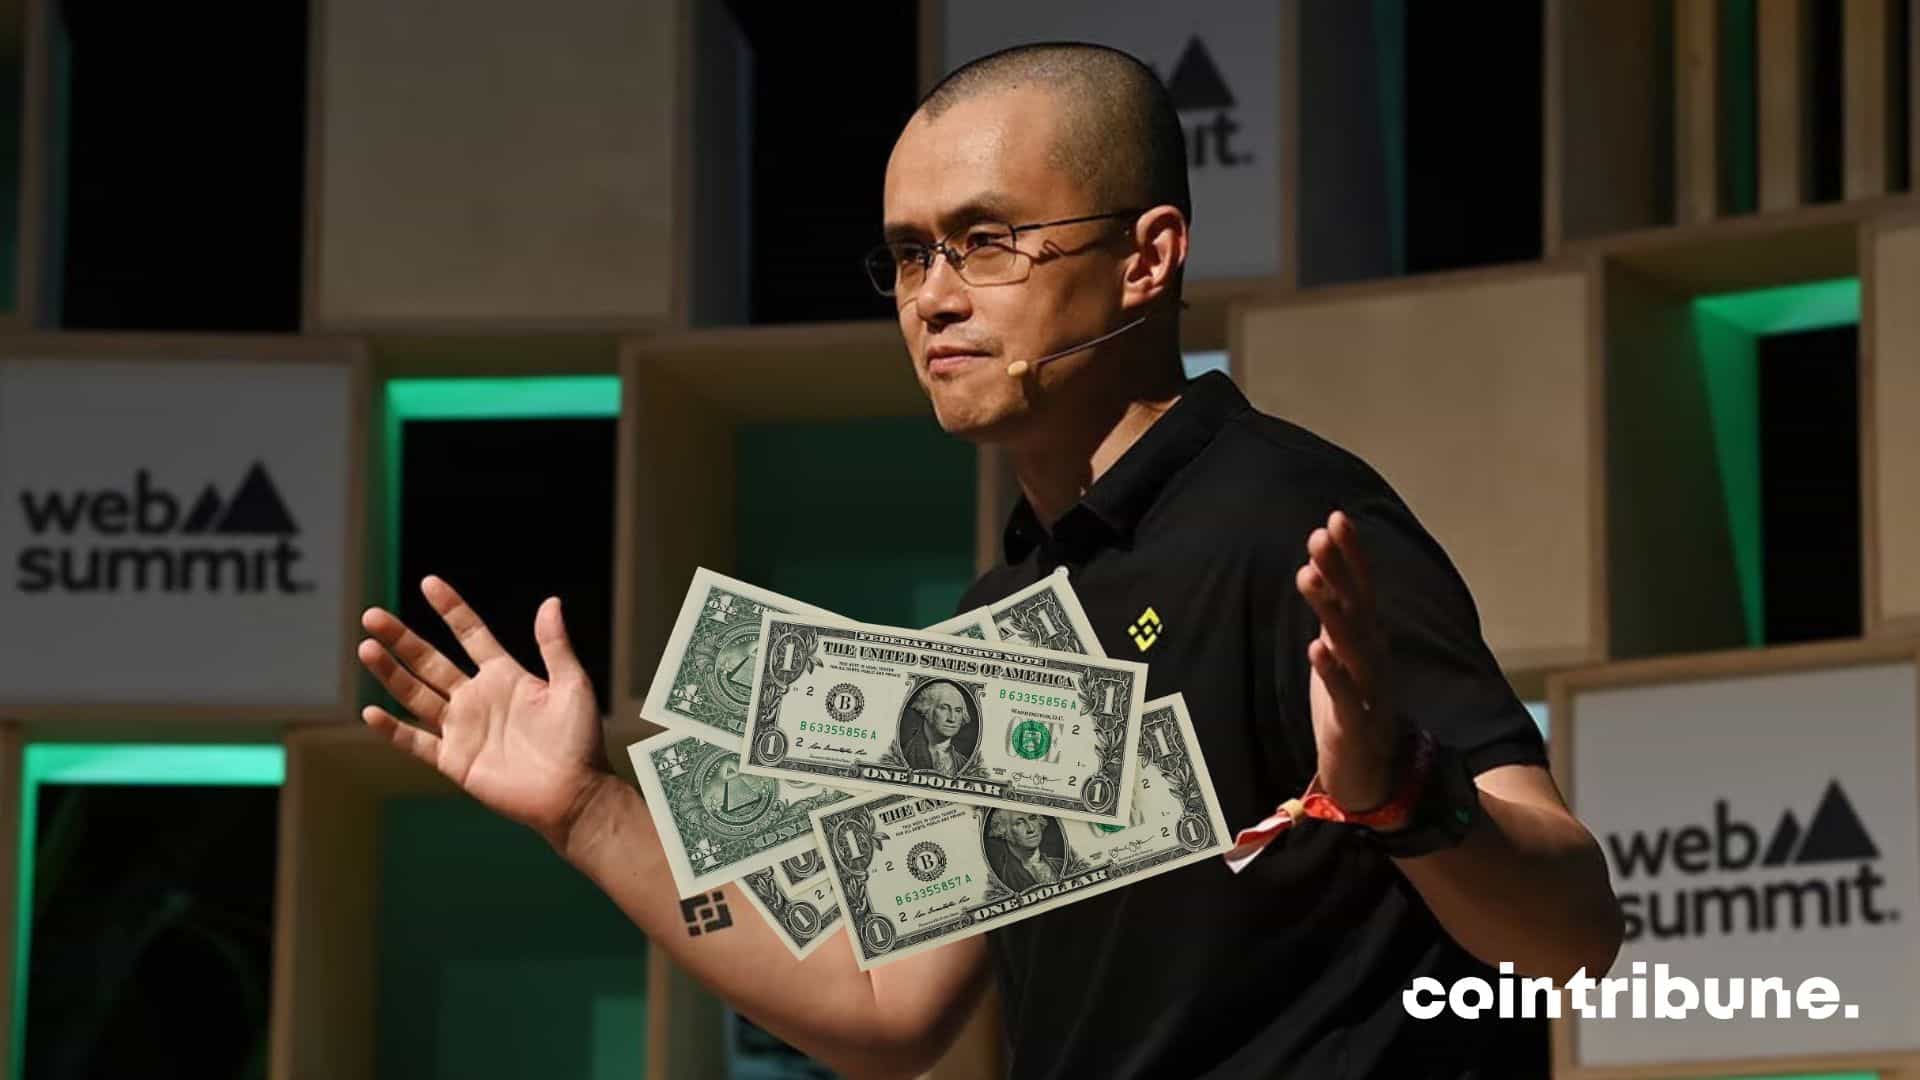 A photo of Changpeng Zhao (CZ) with dollar bills added on him